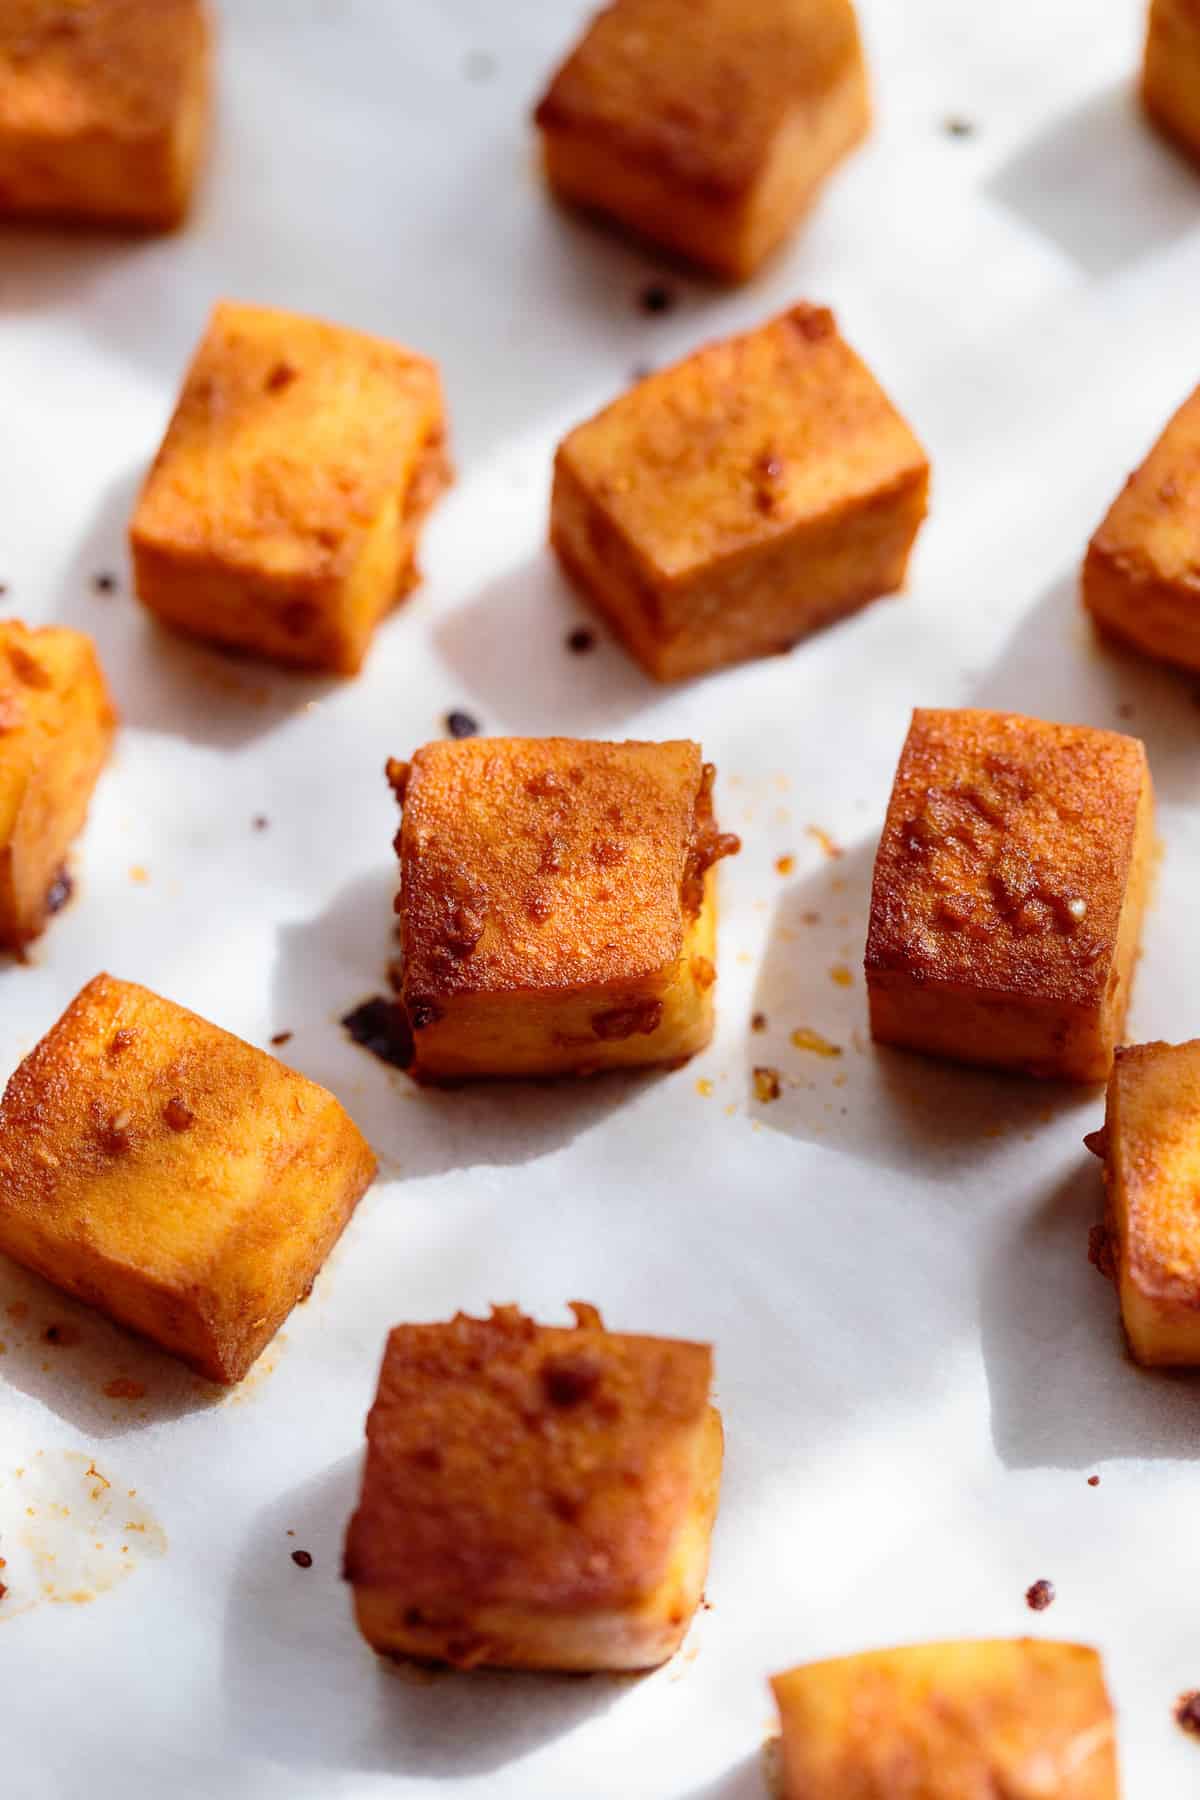 Baked marinated tofu cubes on parchment paper.